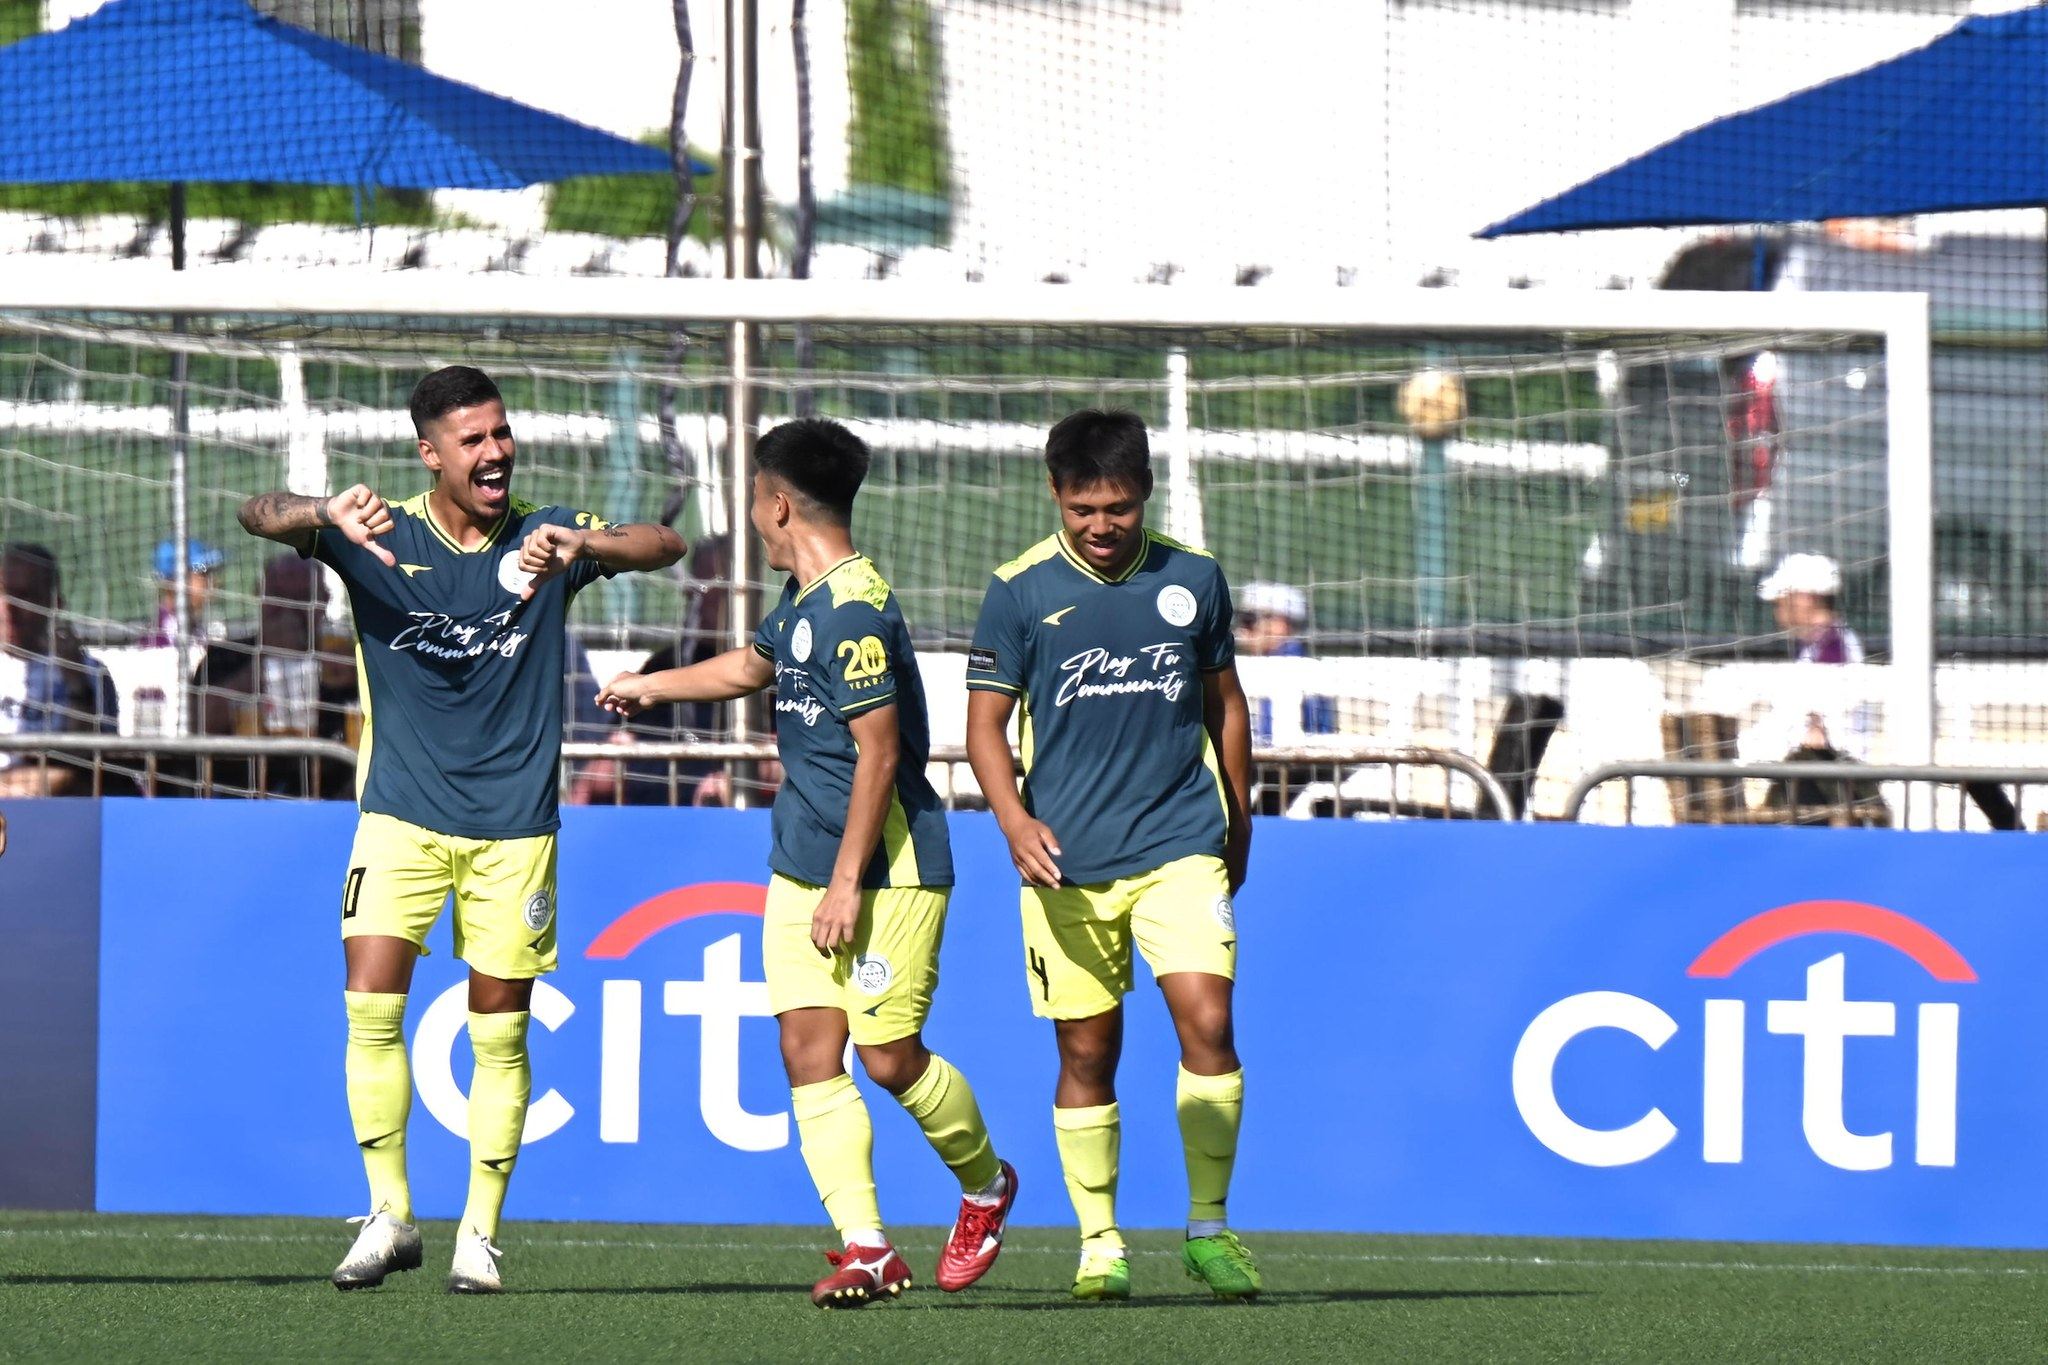 Tai Po will try to repeat last year’s heroics in the Soccer Sevens, but have a league match on the same day. Photo: HKFC Citi Soccer Sevens